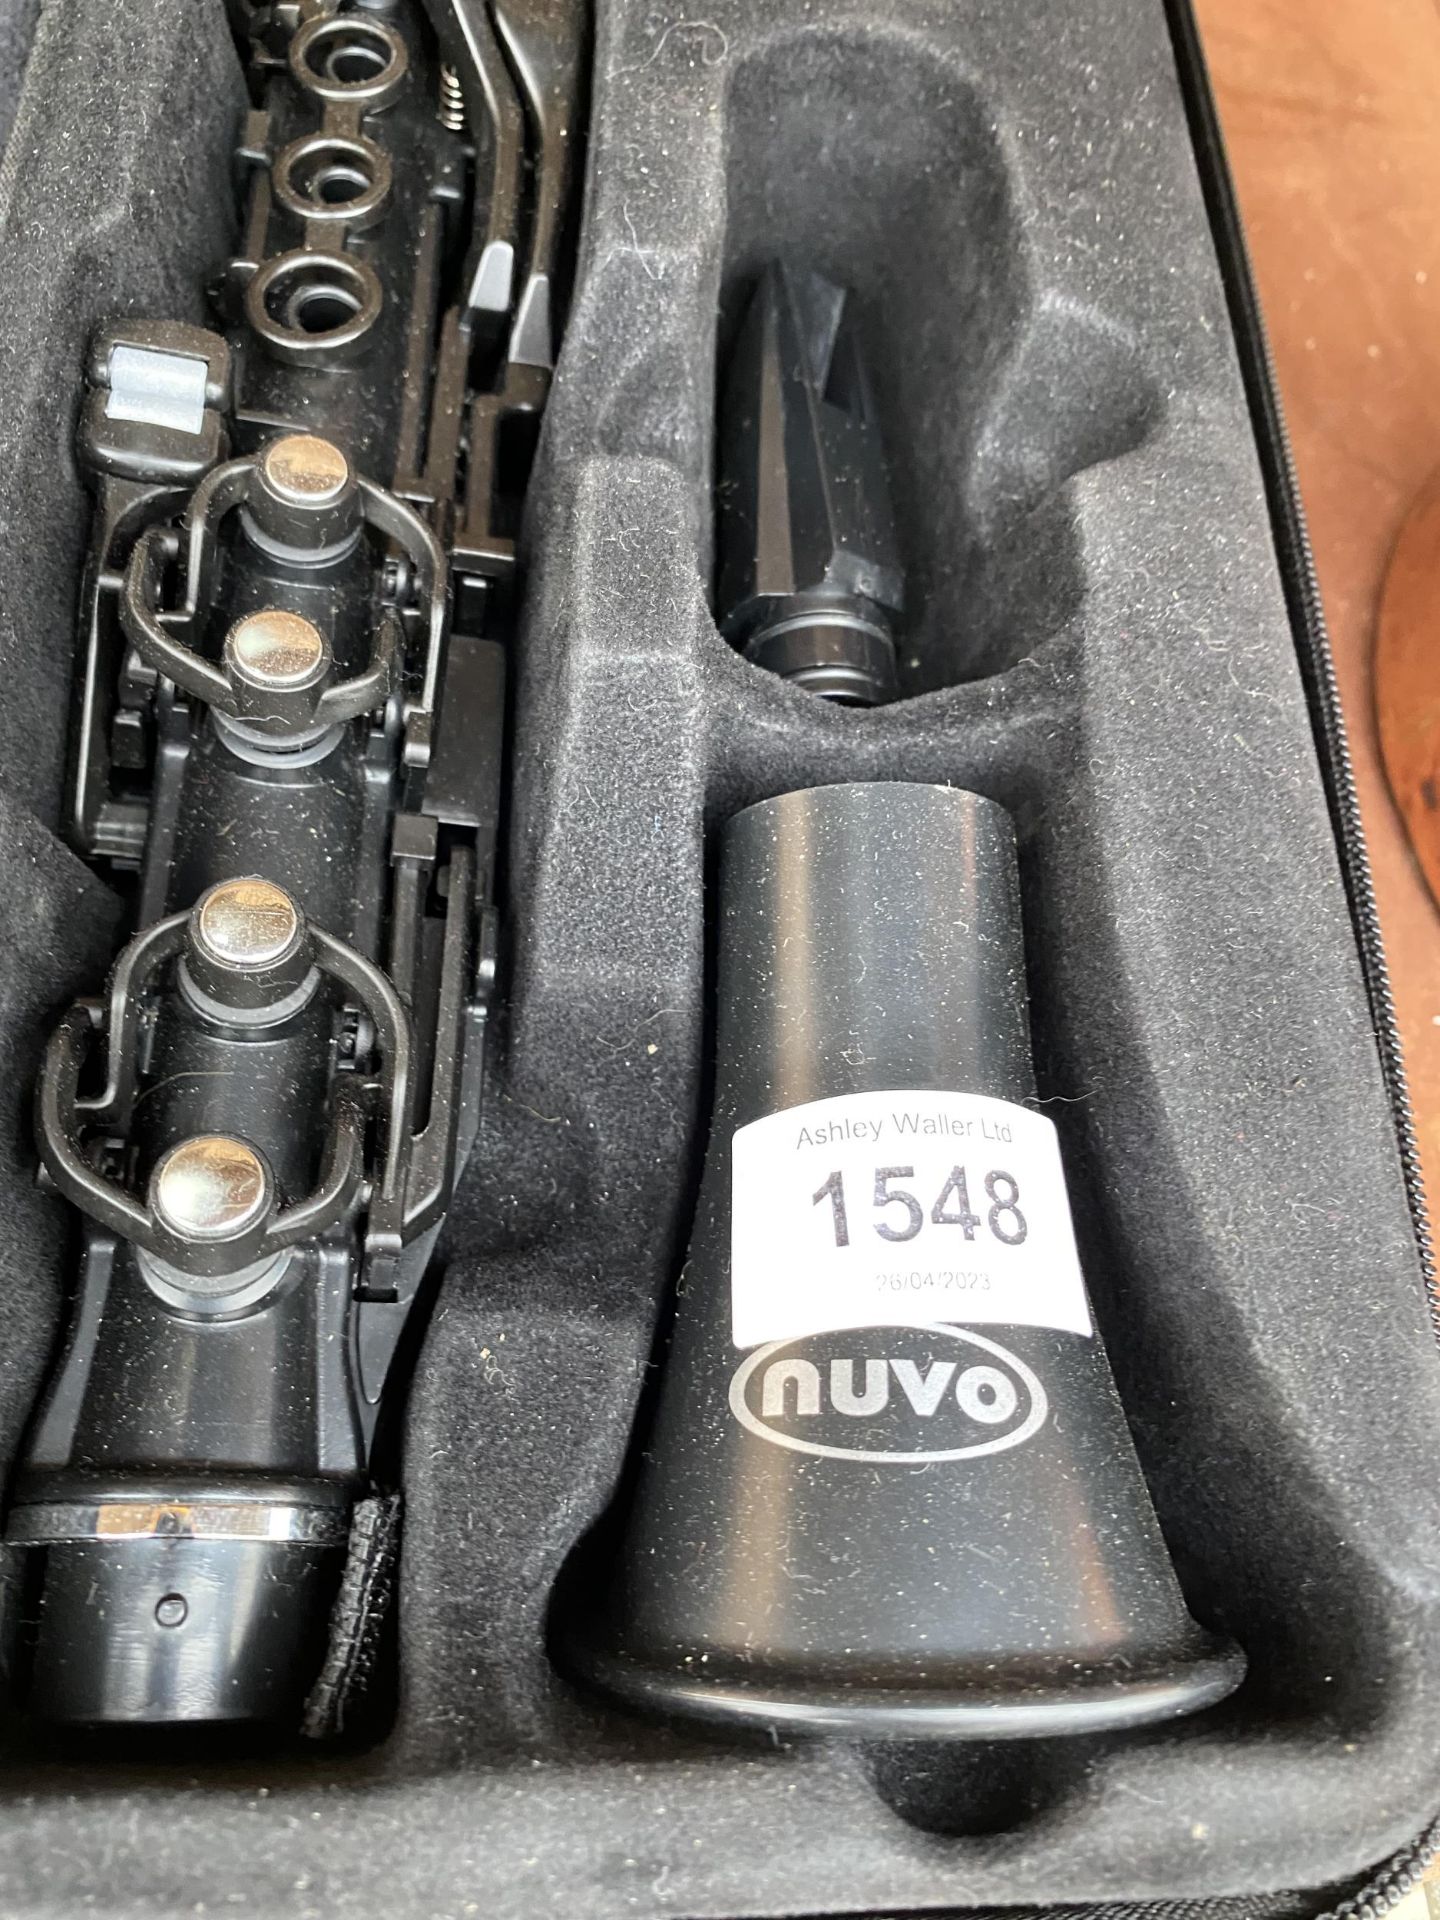 A PLASTIC NUVO CLARINET WITH CARRY CASE - Image 3 of 3